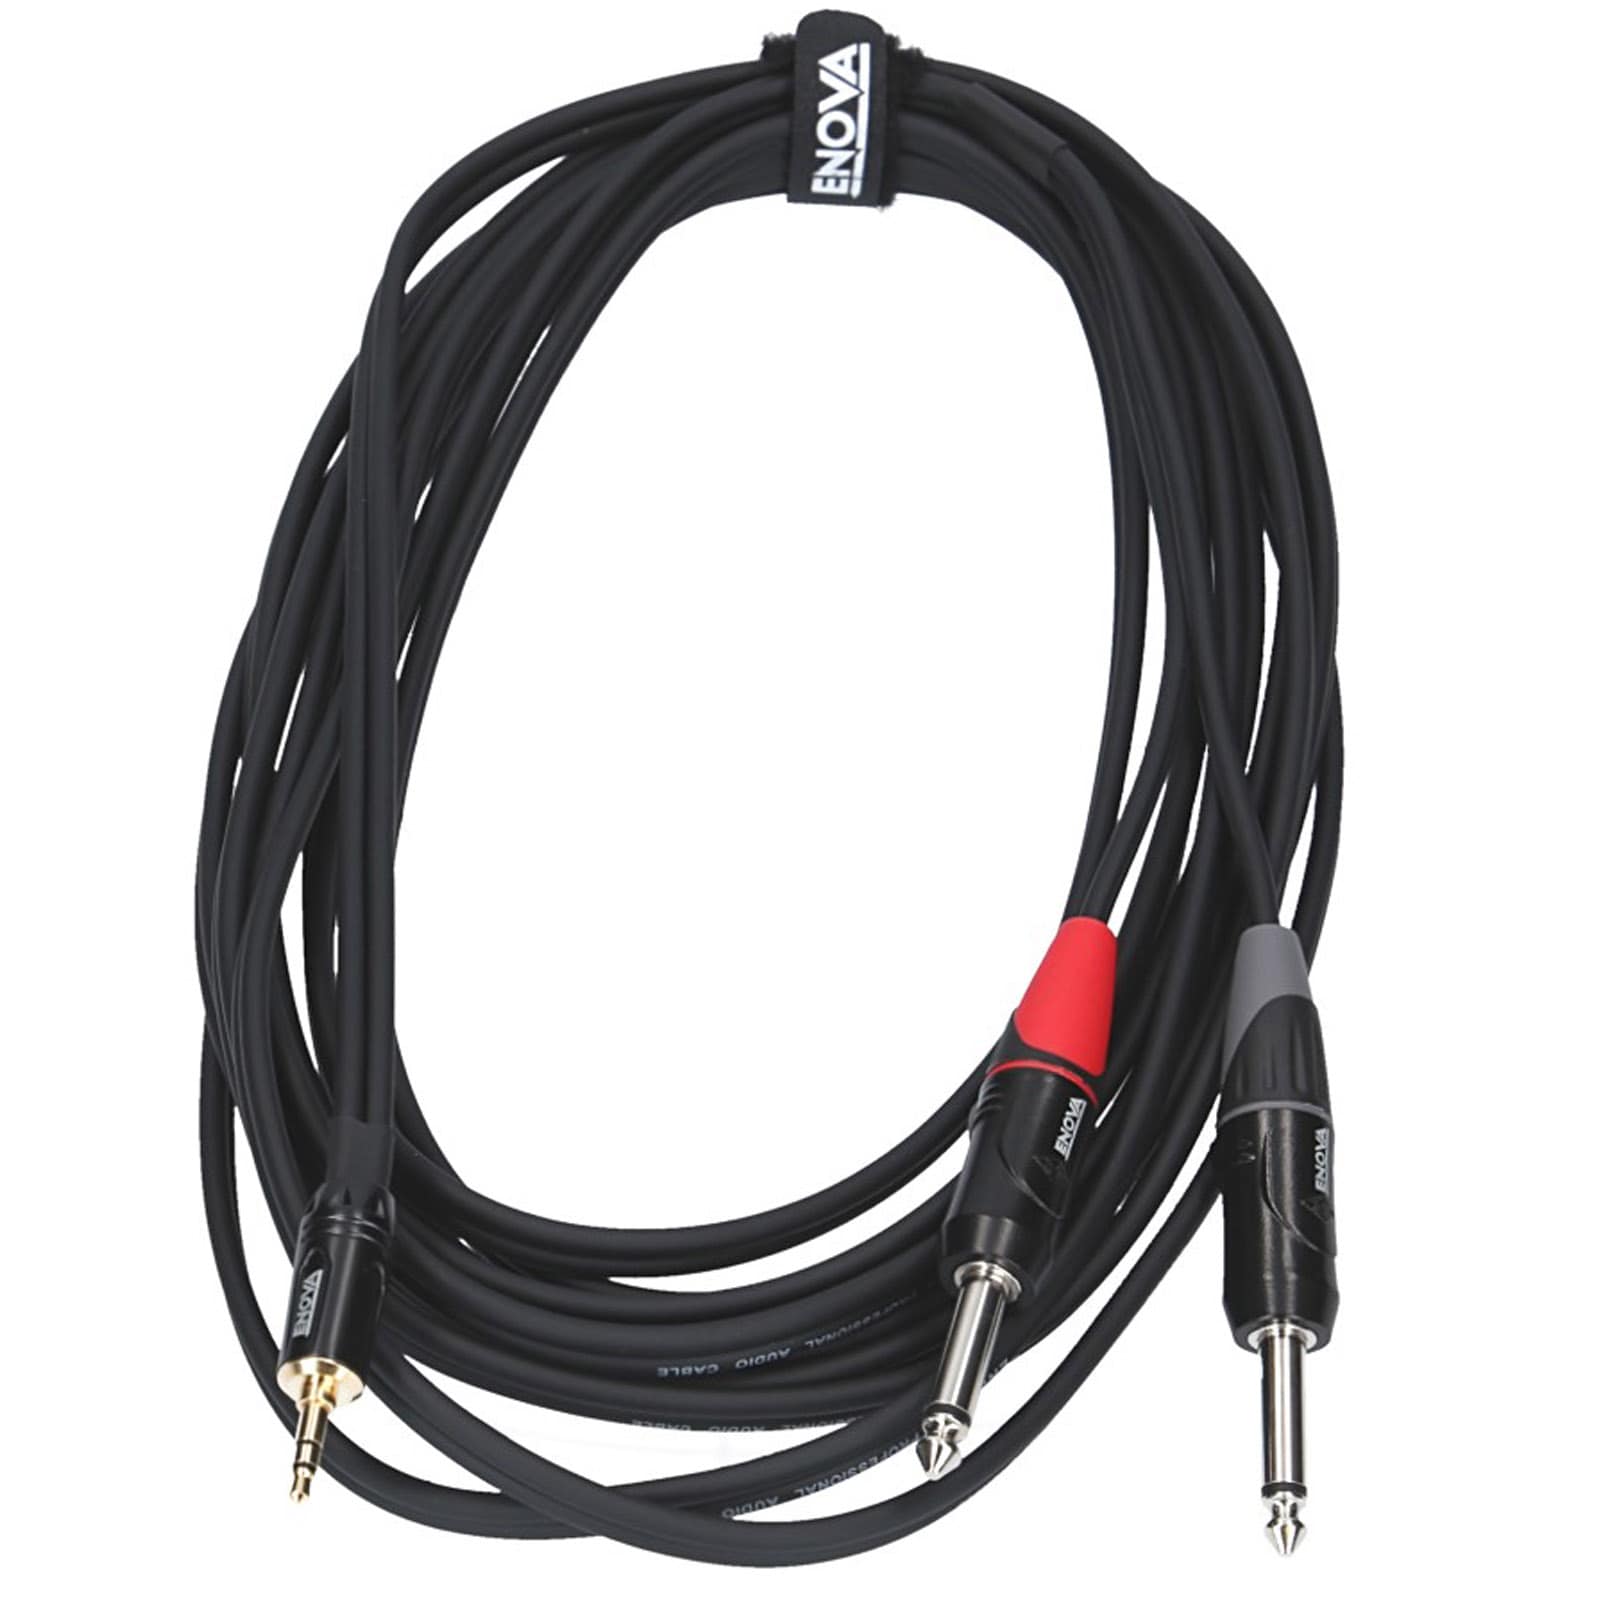 Audio Jack3.5mm Stereo Jack To Rca Female Audio Cable Converter -  High-quality